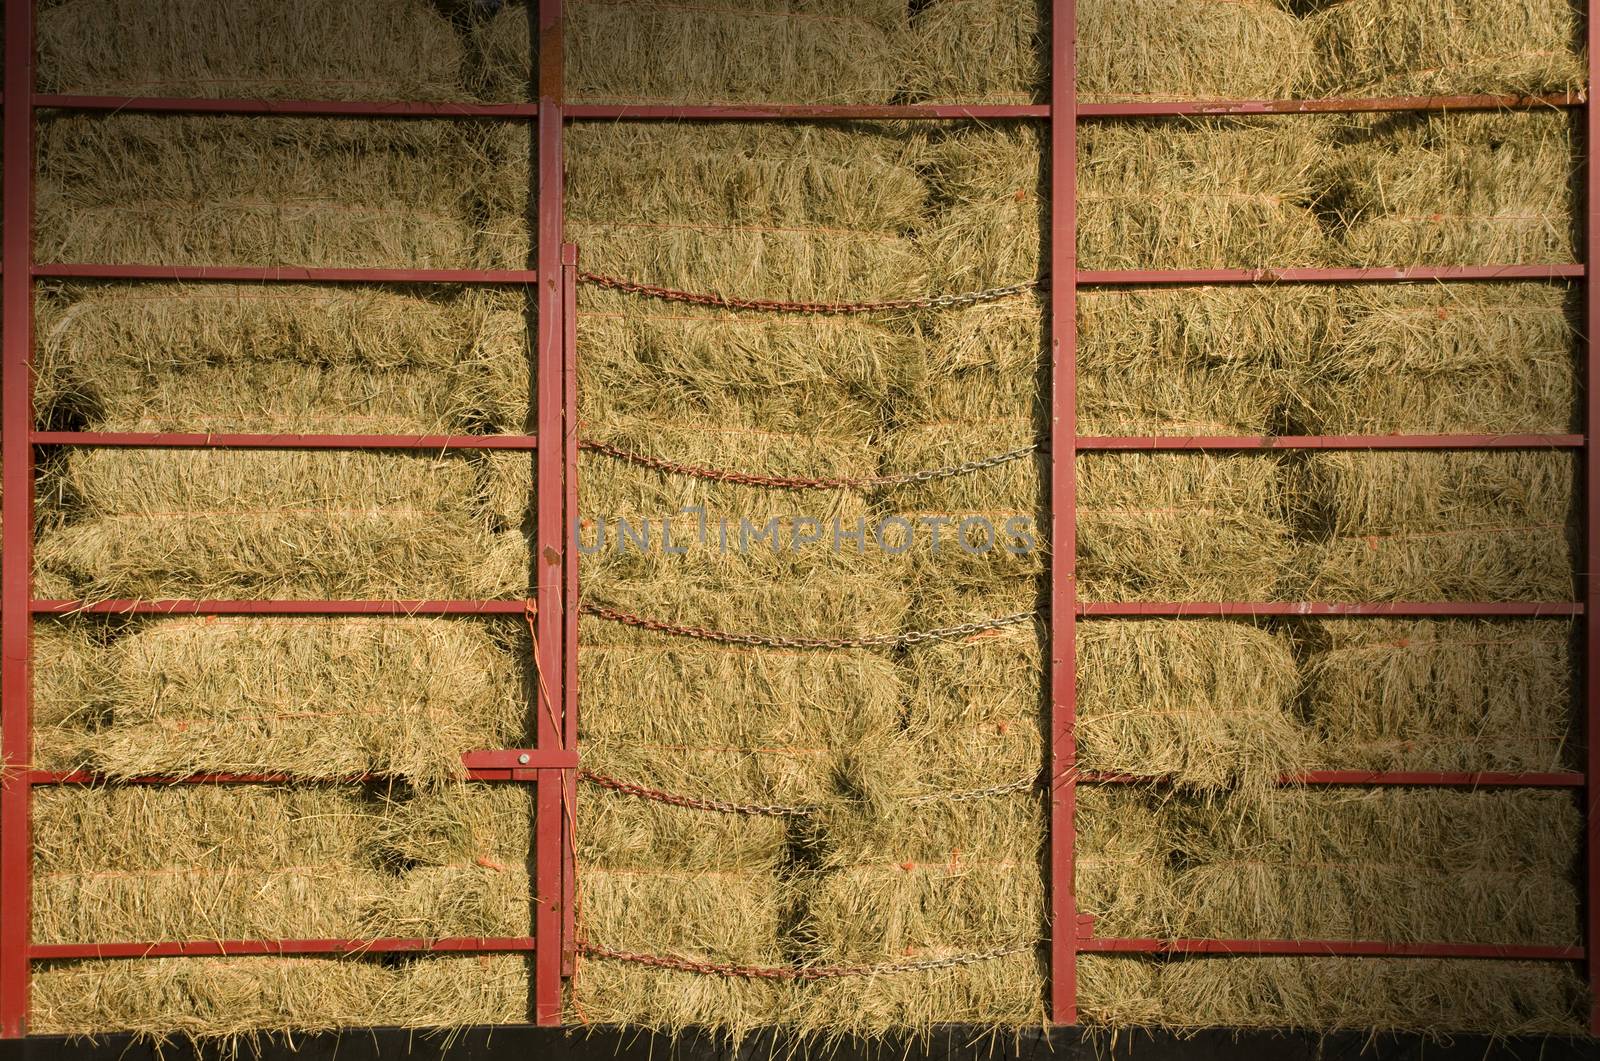 Hay bales piled within a cart by Balefire9